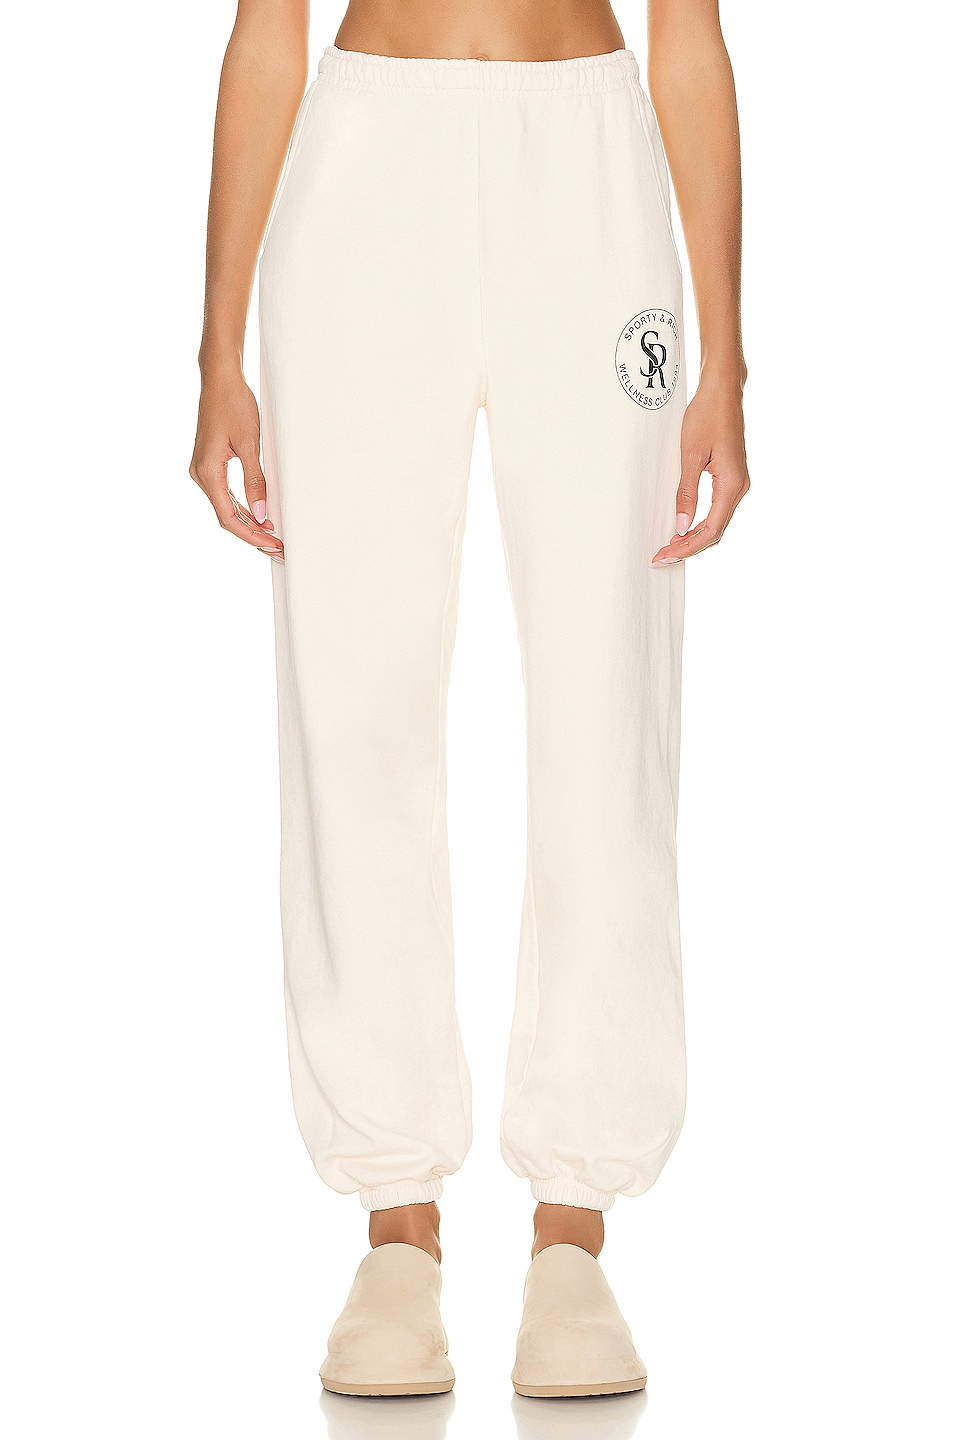 Image 1 of Sporty & Rich S & R Sweatpant in Cream & Black